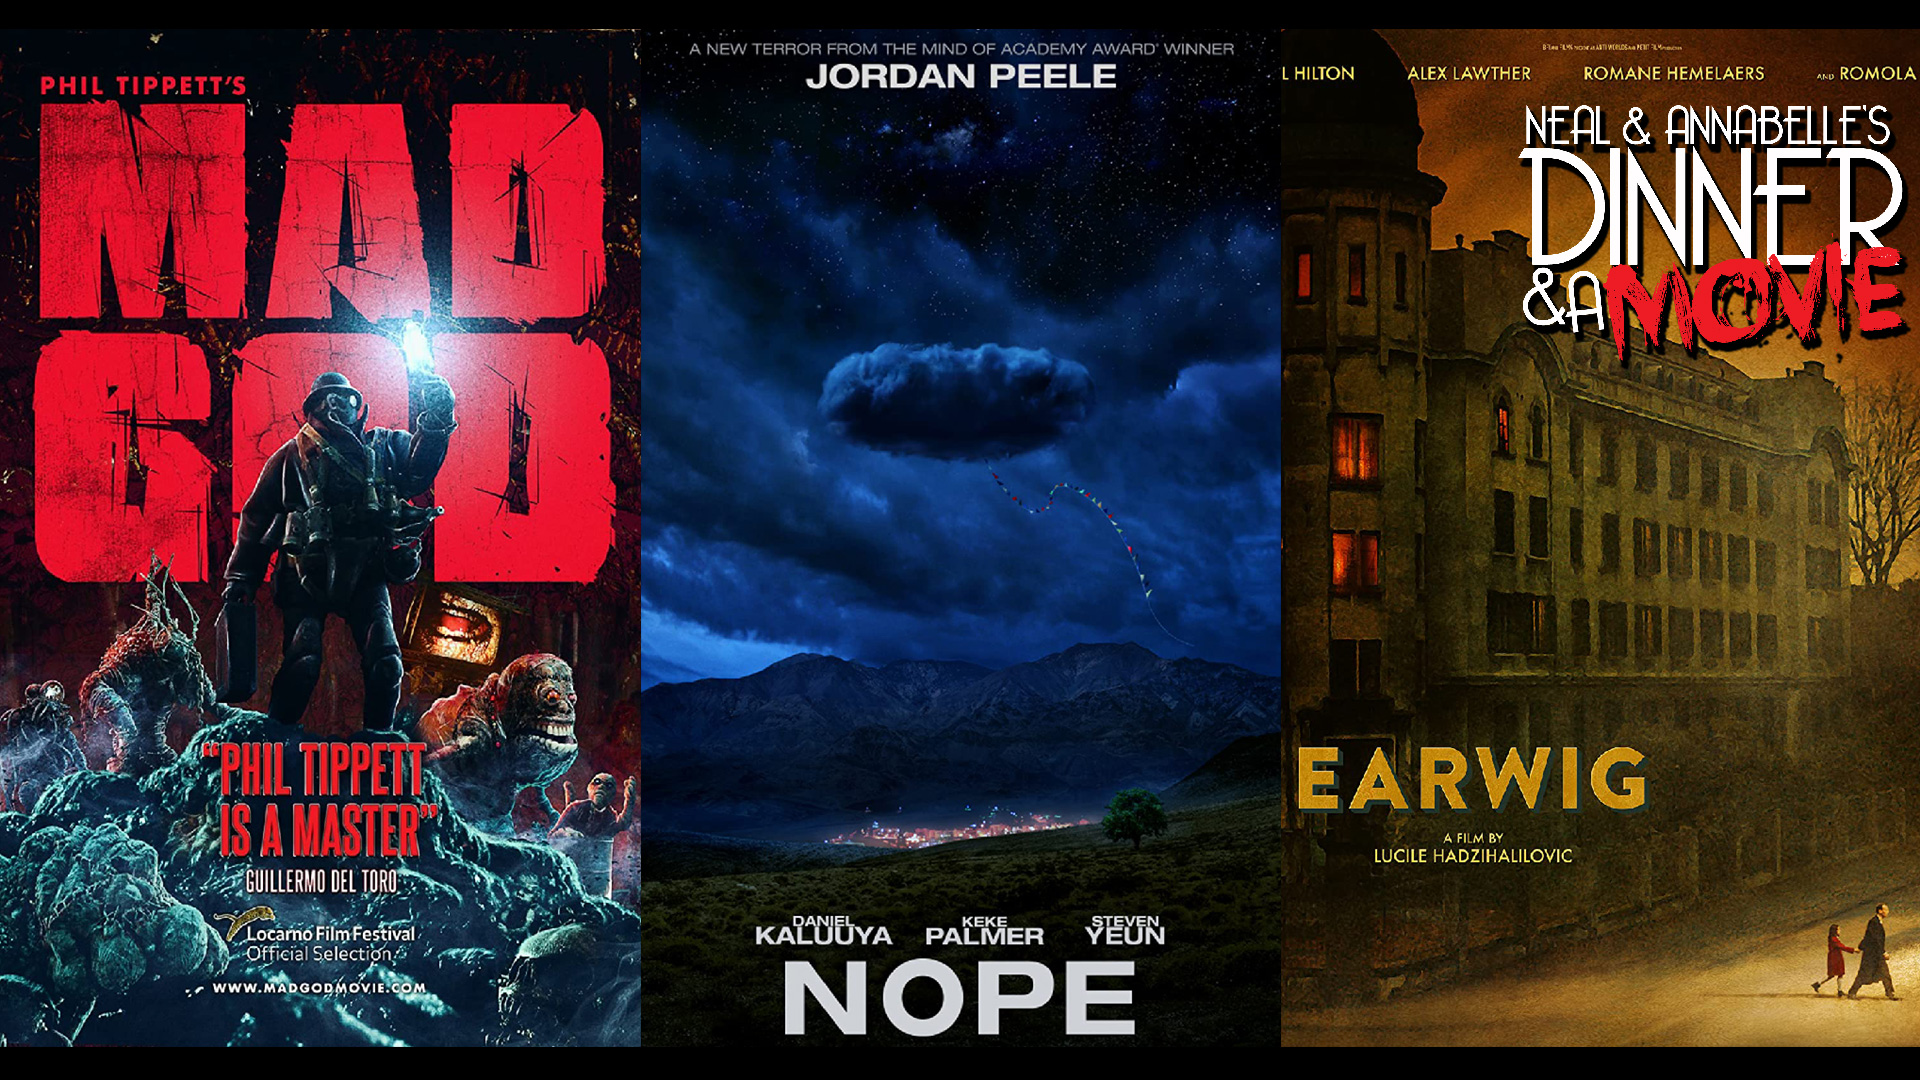 Dinner & A Movie: Mad God, Nope and Earwig